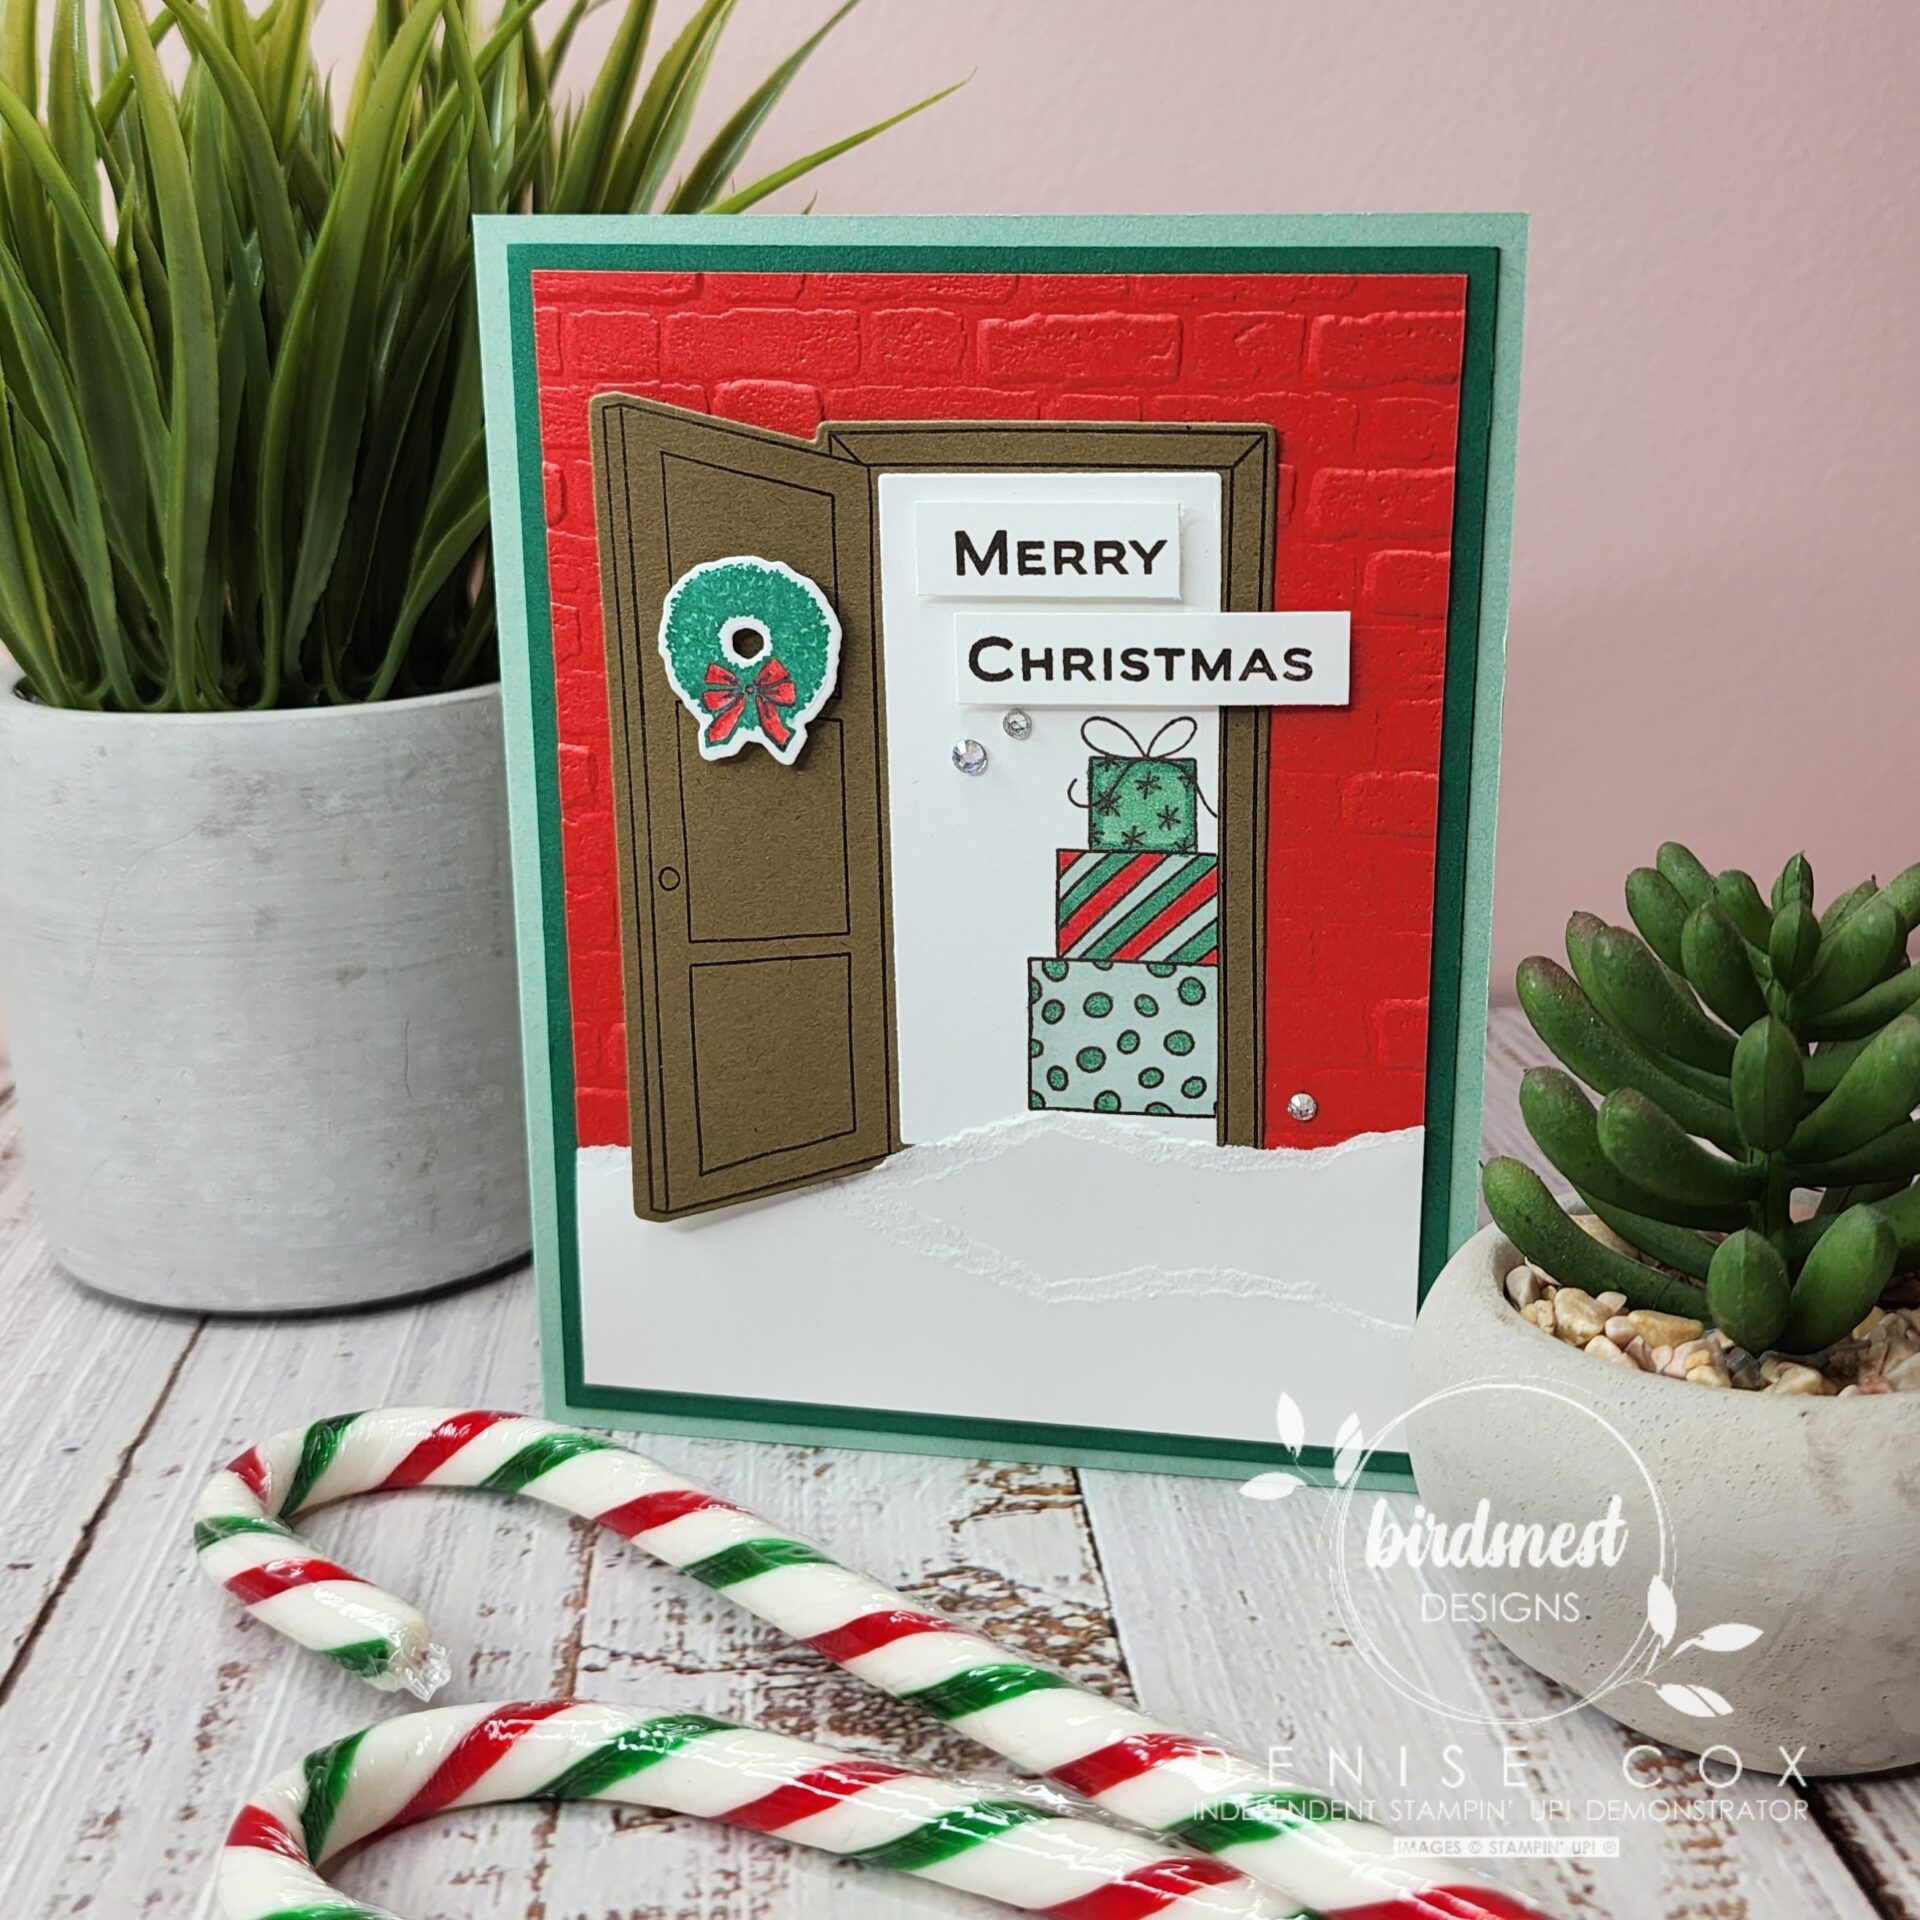 Photo of the Christmas Card with candy canes laying in front